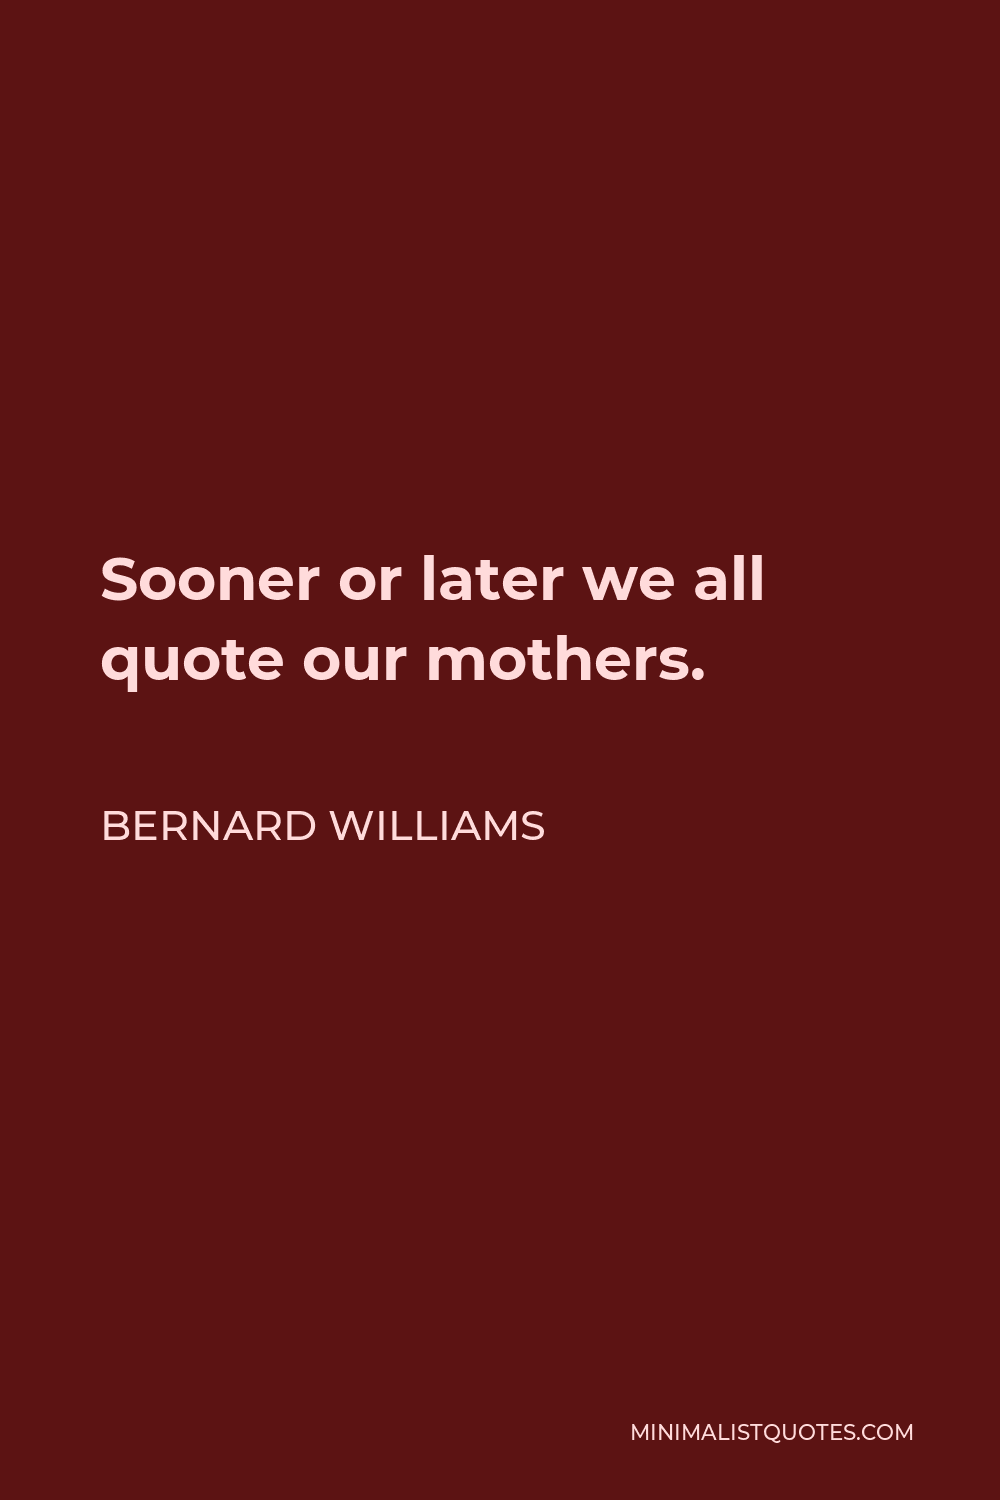 Bernard Williams Quote - Sooner or later we all quote our mothers.